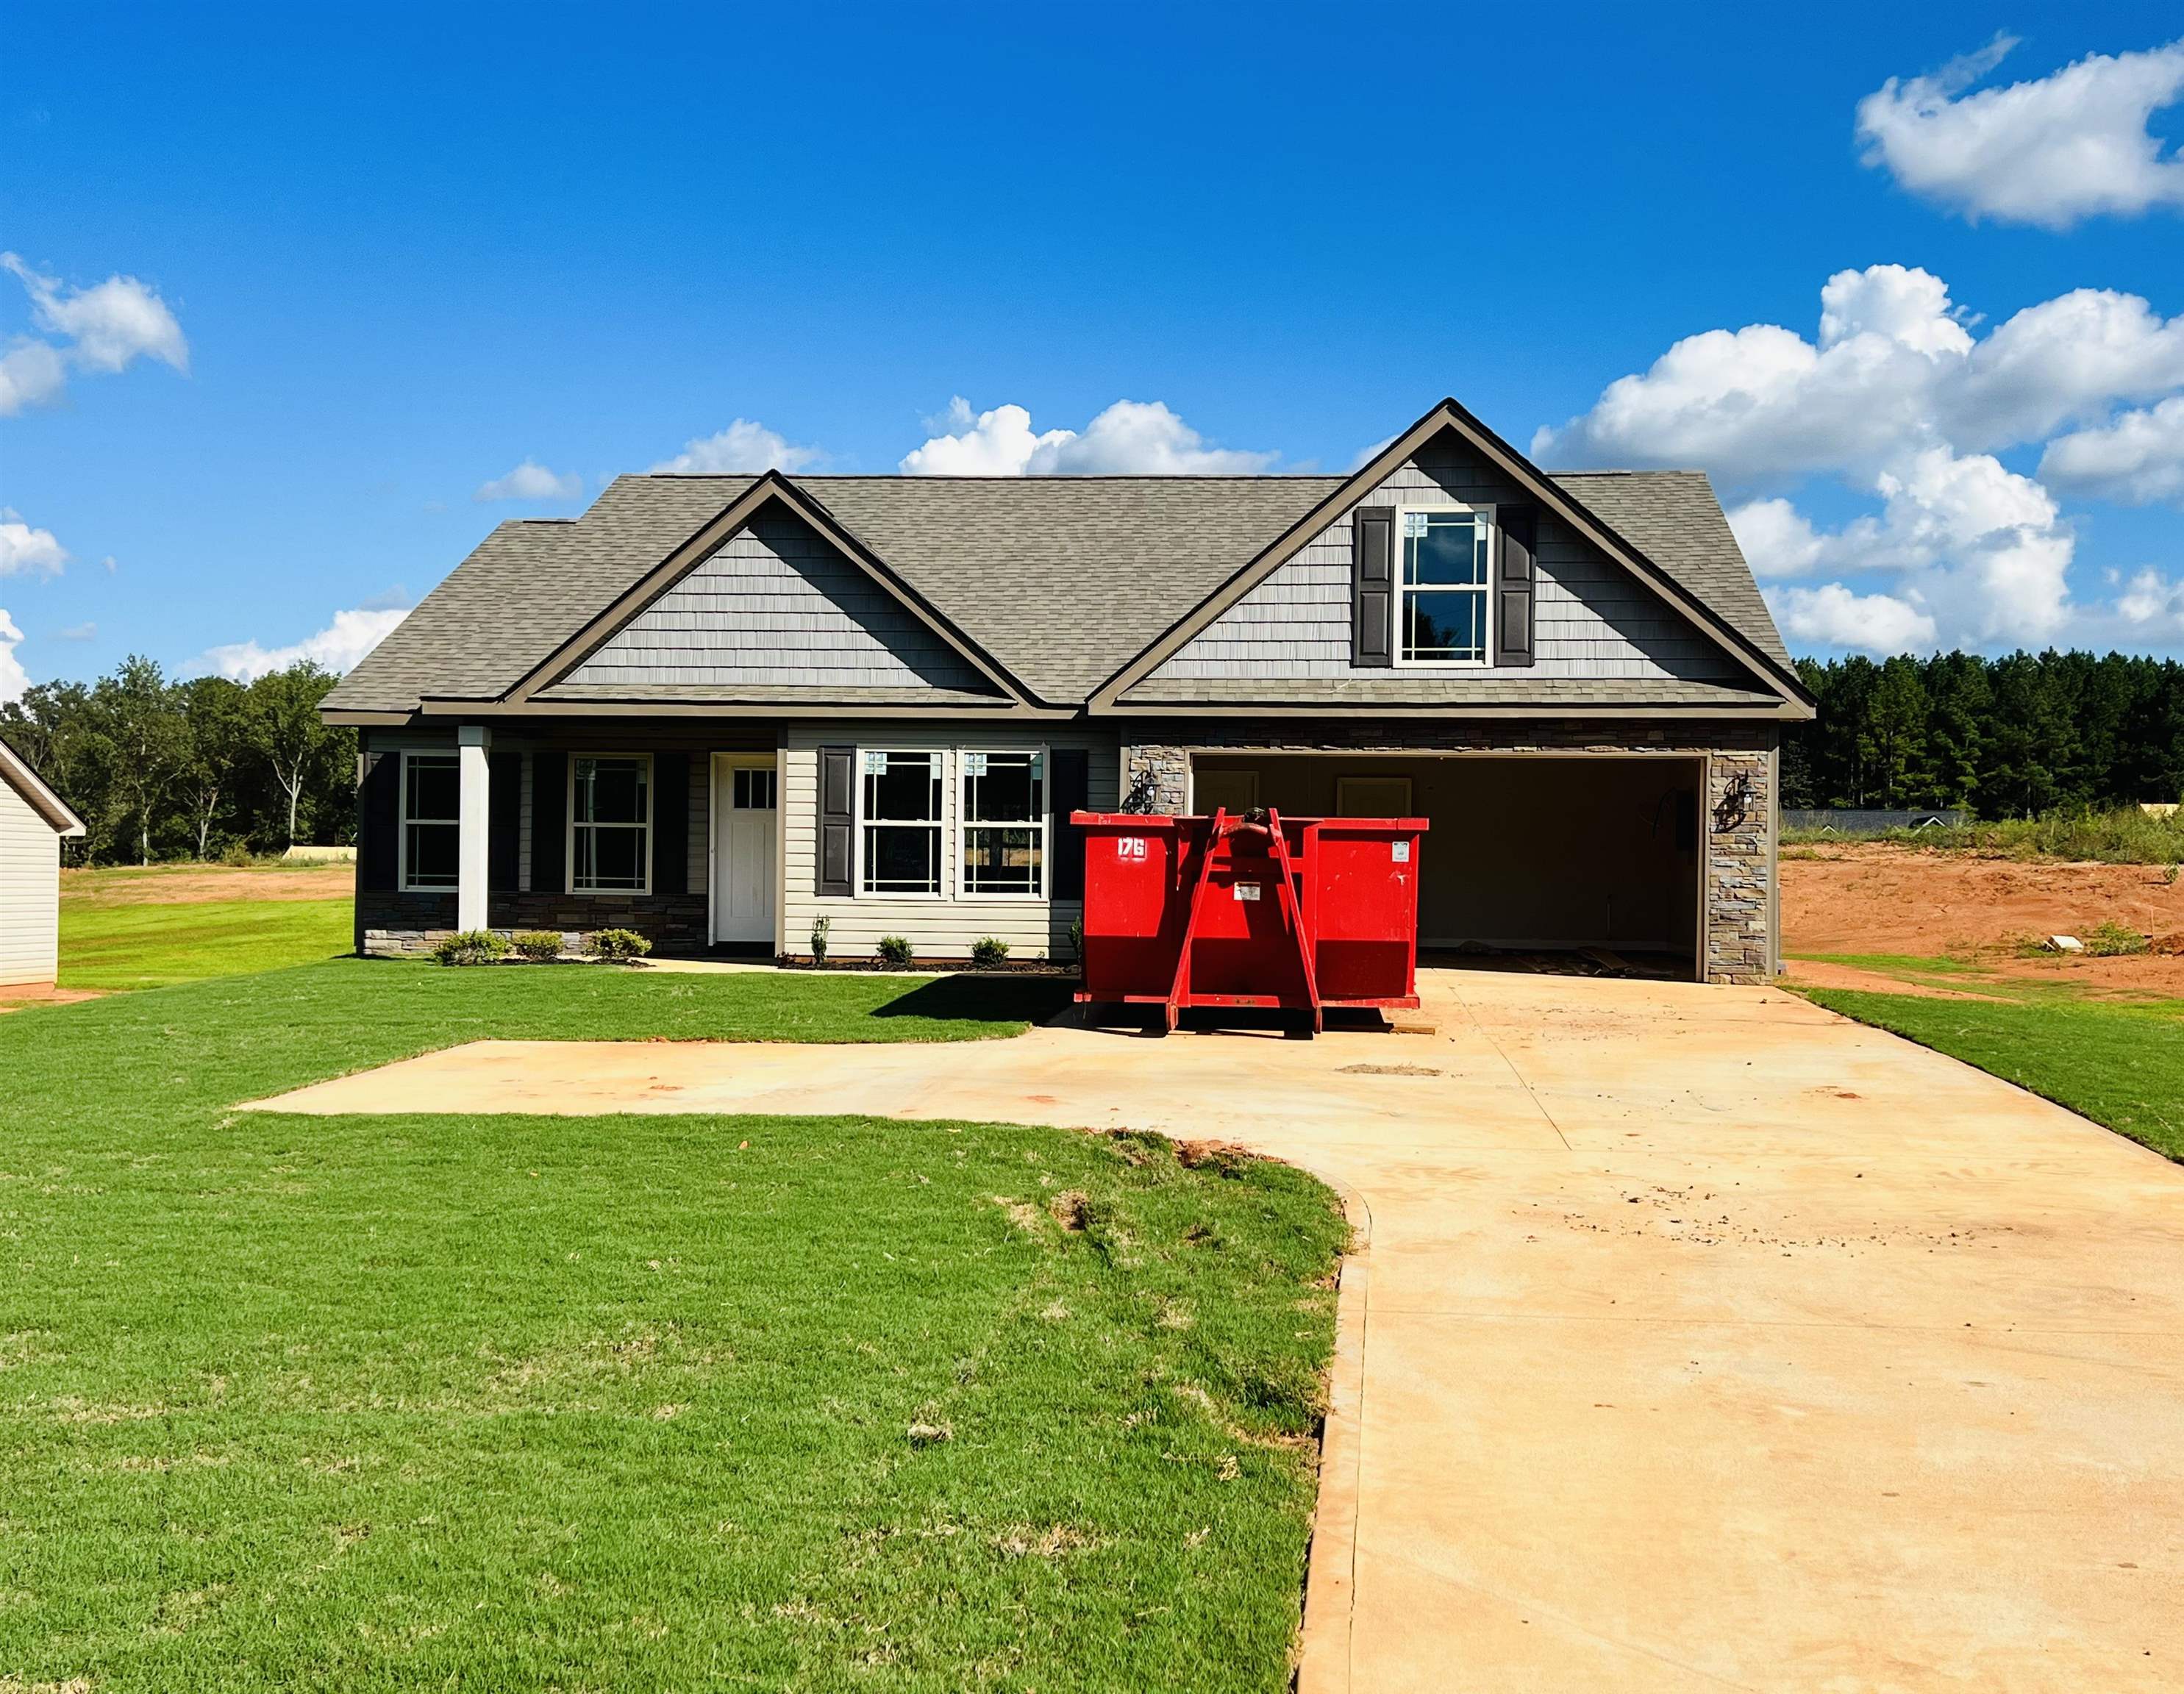 Welcome to Double Creek! The Jackson plan offers a beautiful, modern layout. Split floor plan. Kitchen open to living area. Plus a beautiful 12' X 12' sunroom! Home complete with the trademark chair rail, crown molding, and rope lighting.